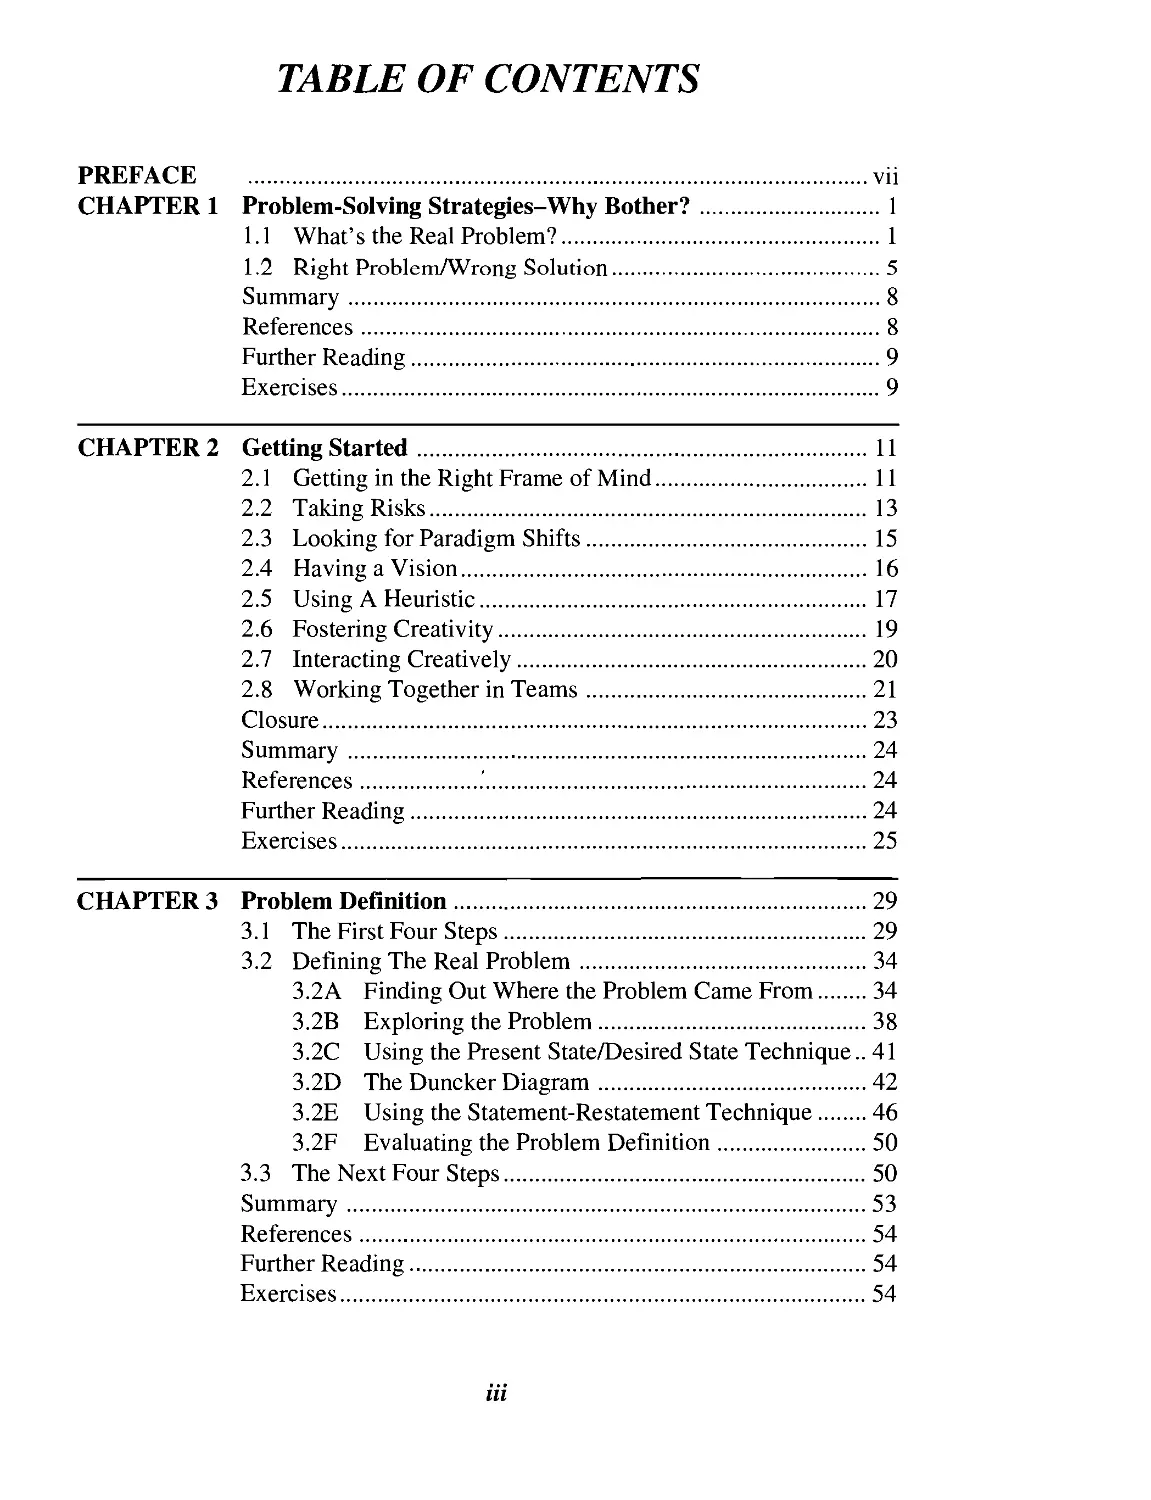 TABLE OF CONTENTS
PREFACE
CHAPTER 1 Problem-Solving Strategies-Why Bother?